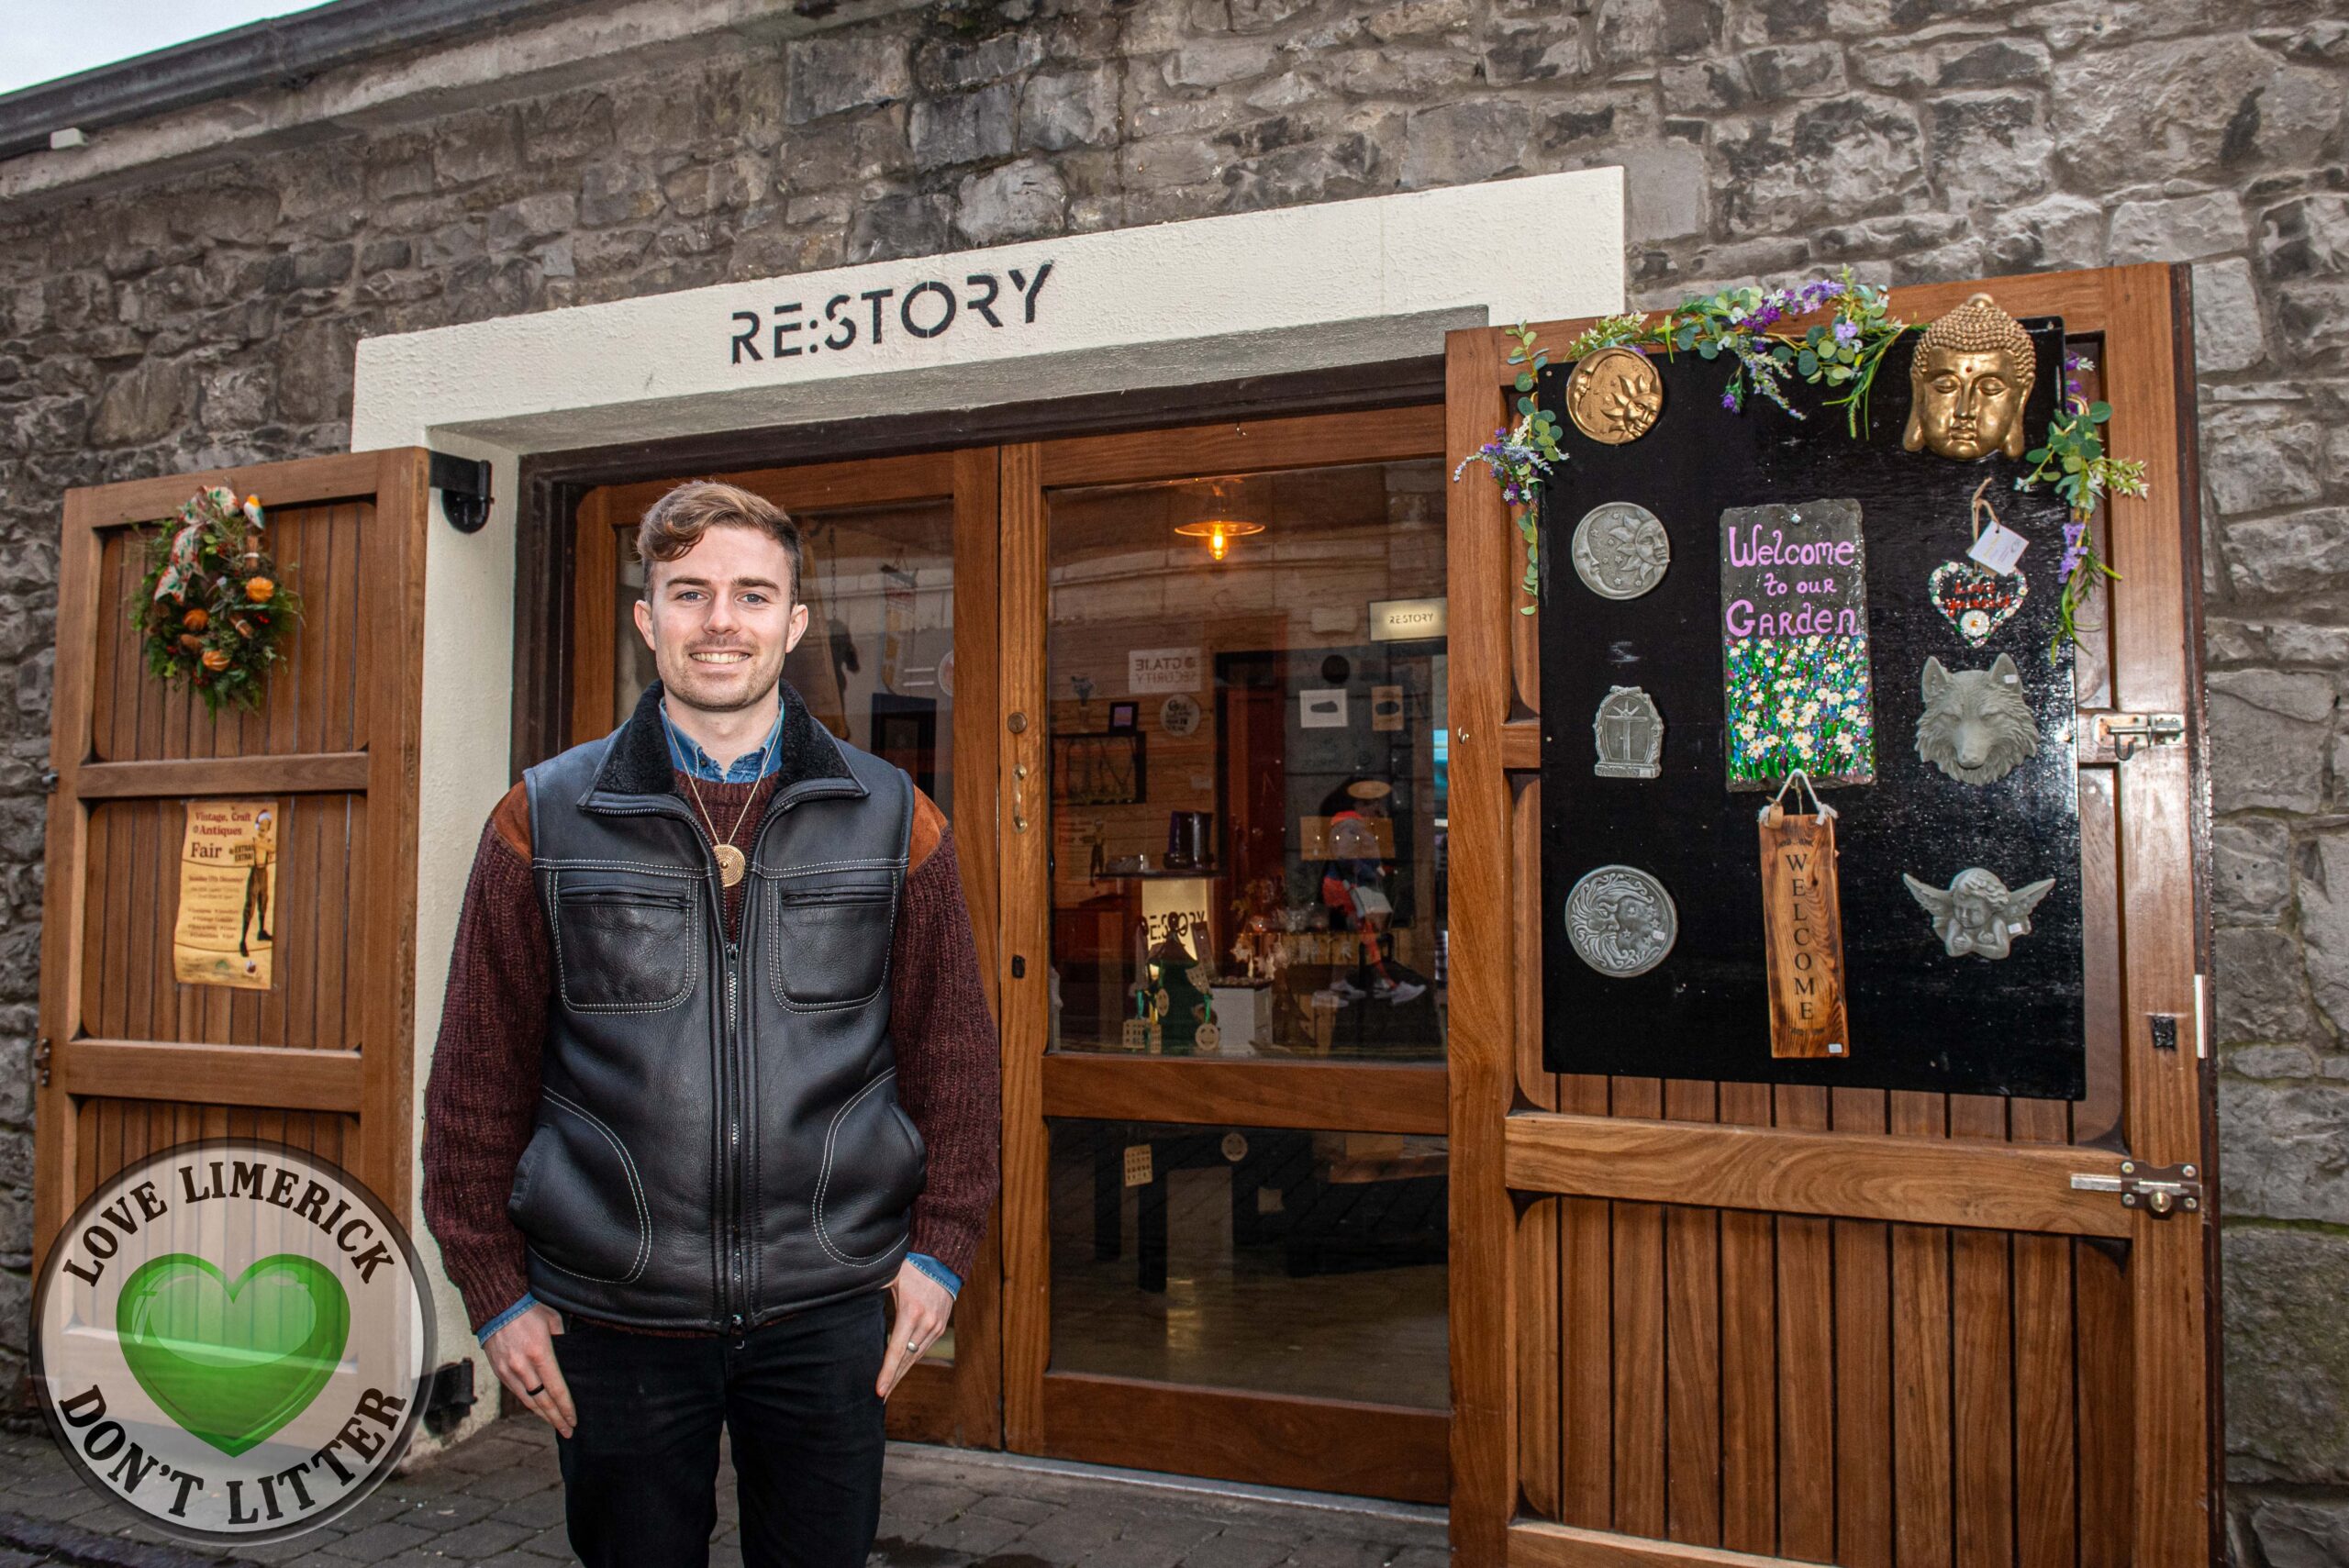 Restory Limerick sells handcrafted and locally produced items bridging the gap between our vibrant past and promising future